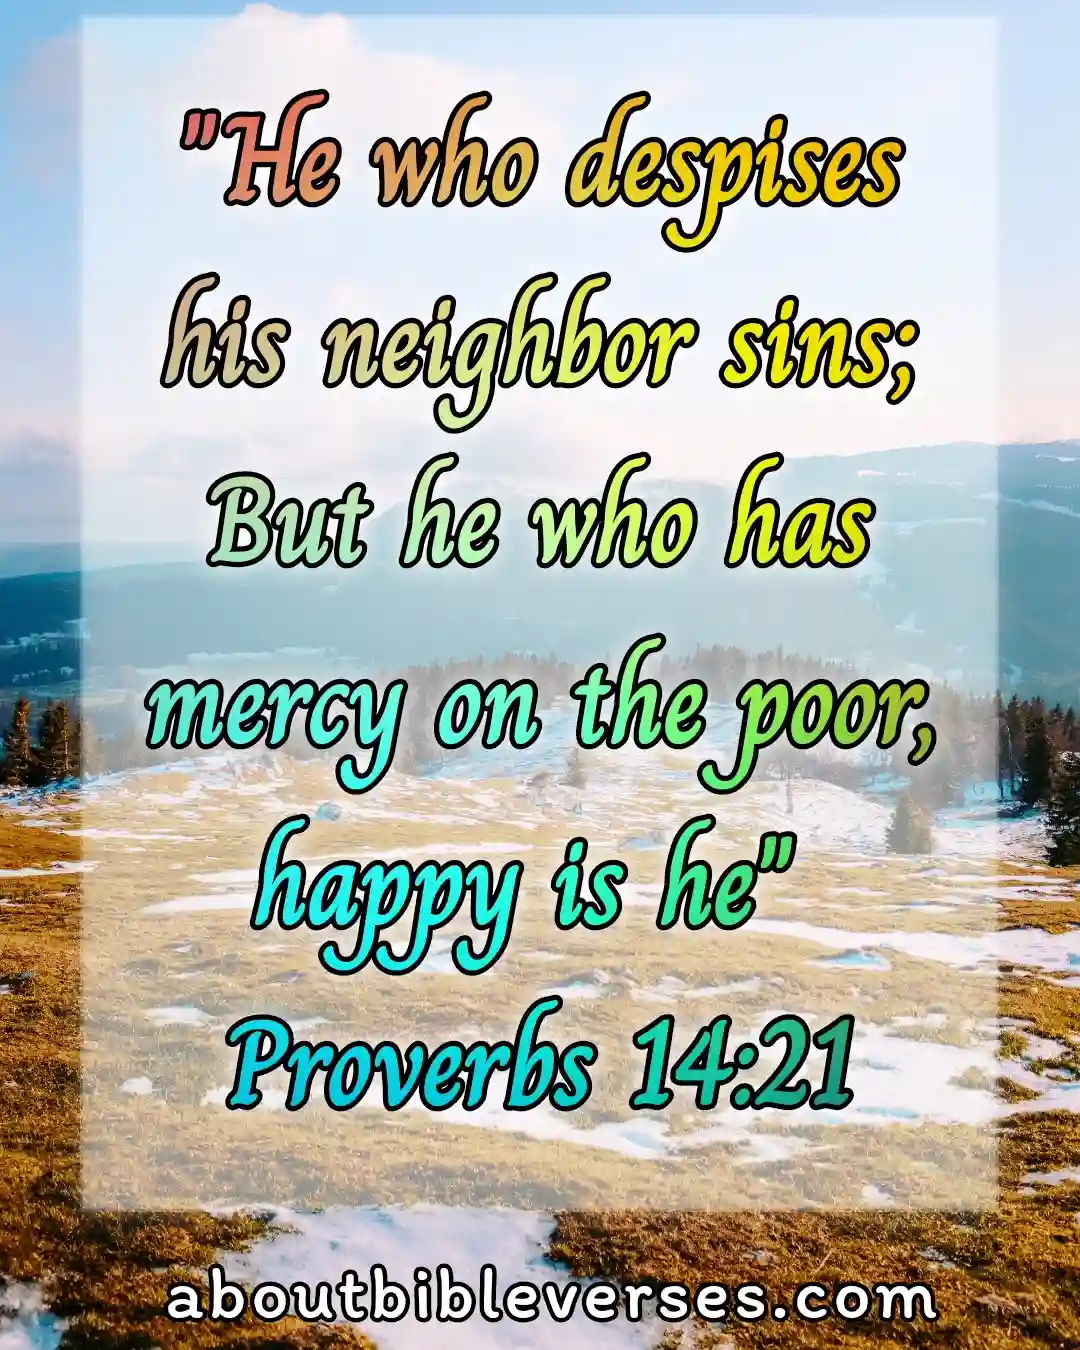 bible verses Helping To others (Proverbs 14:21)